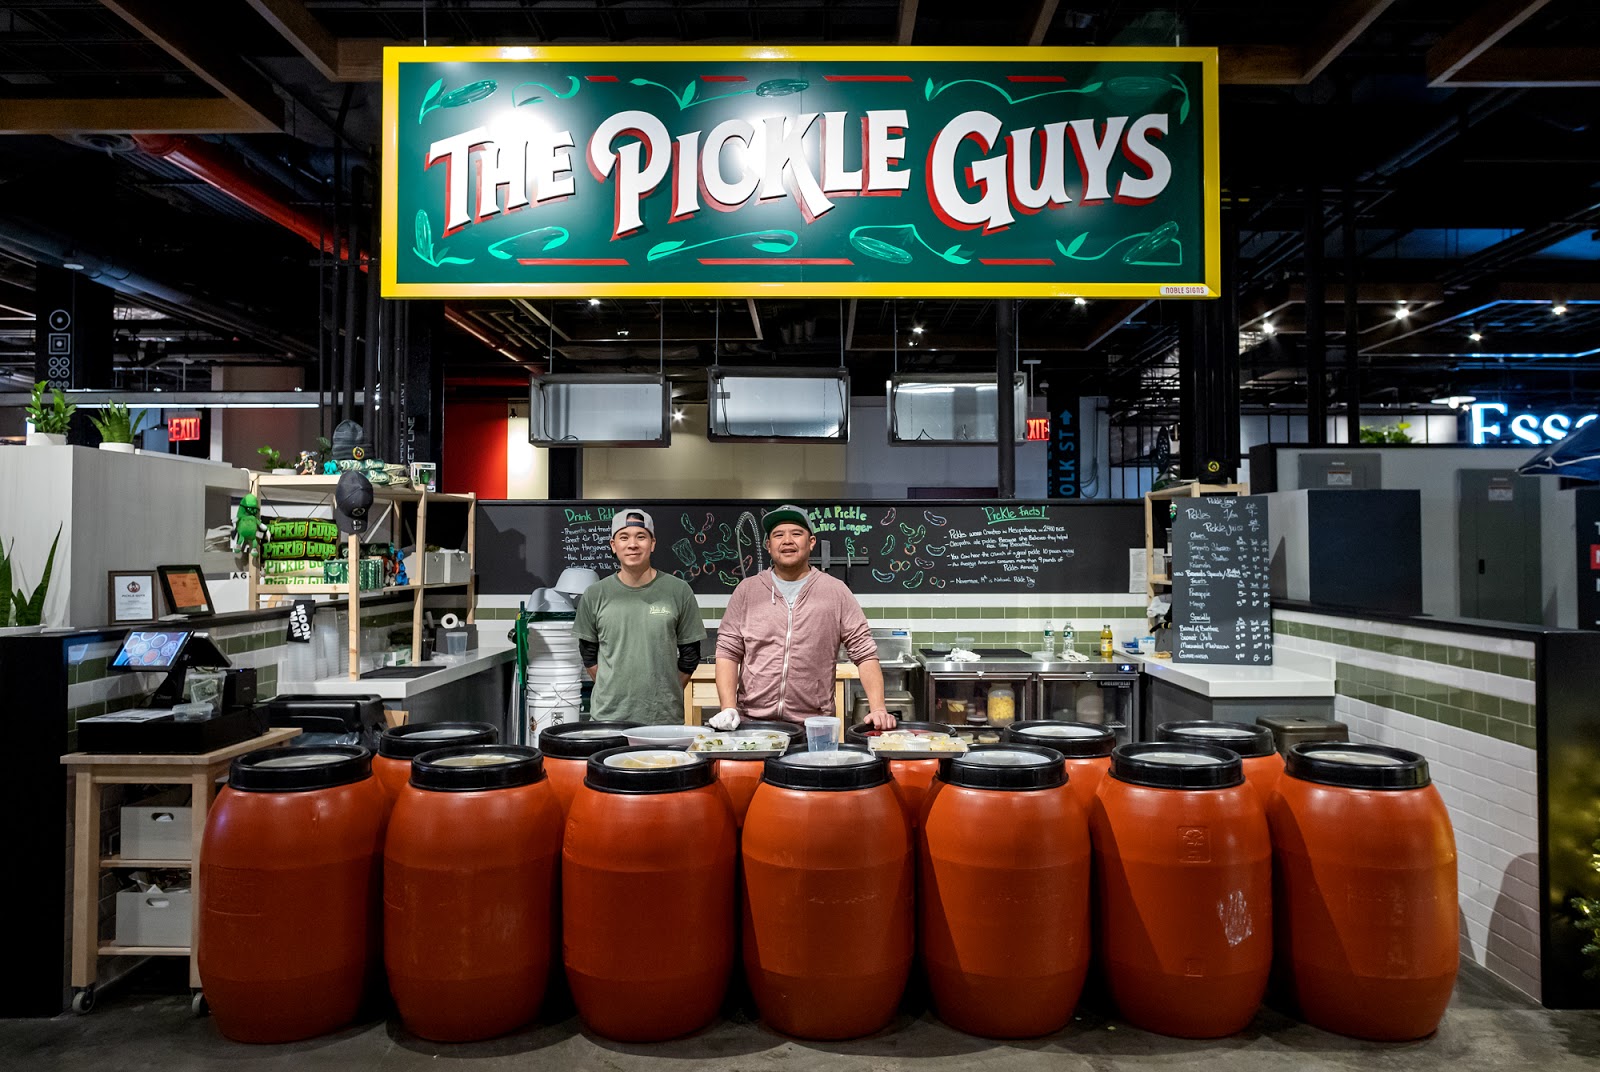 James and Karla Murray Photography: We visit The Pickle Guys